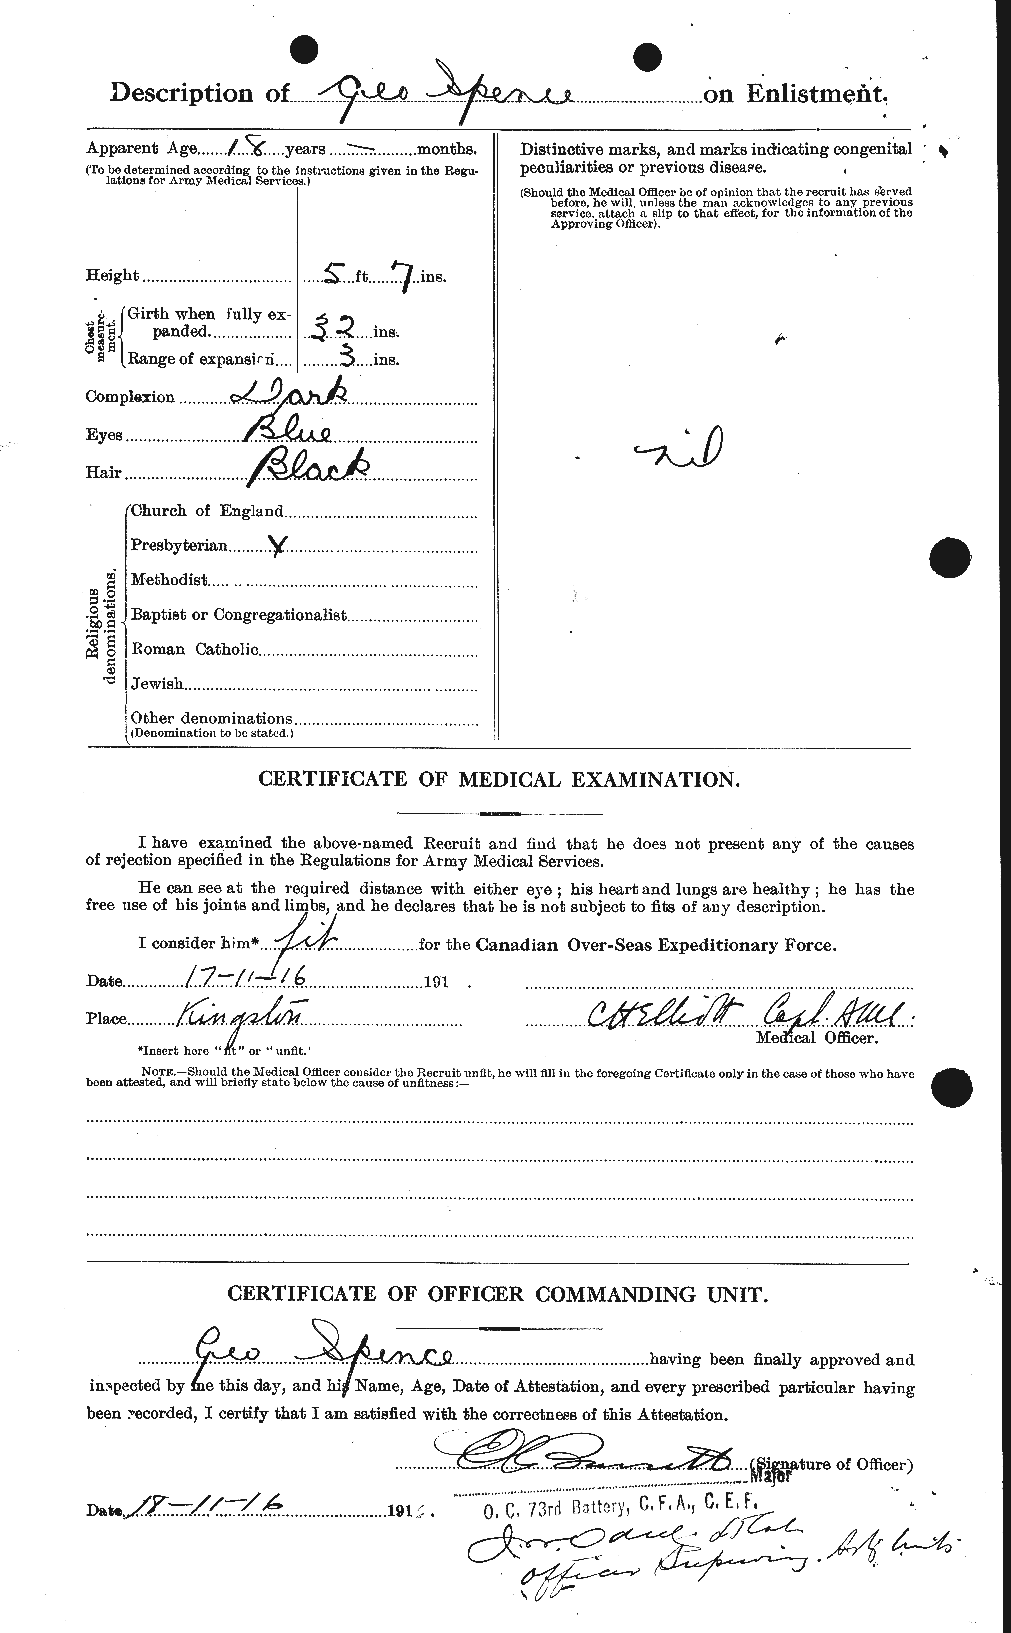 Personnel Records of the First World War - CEF 109524b